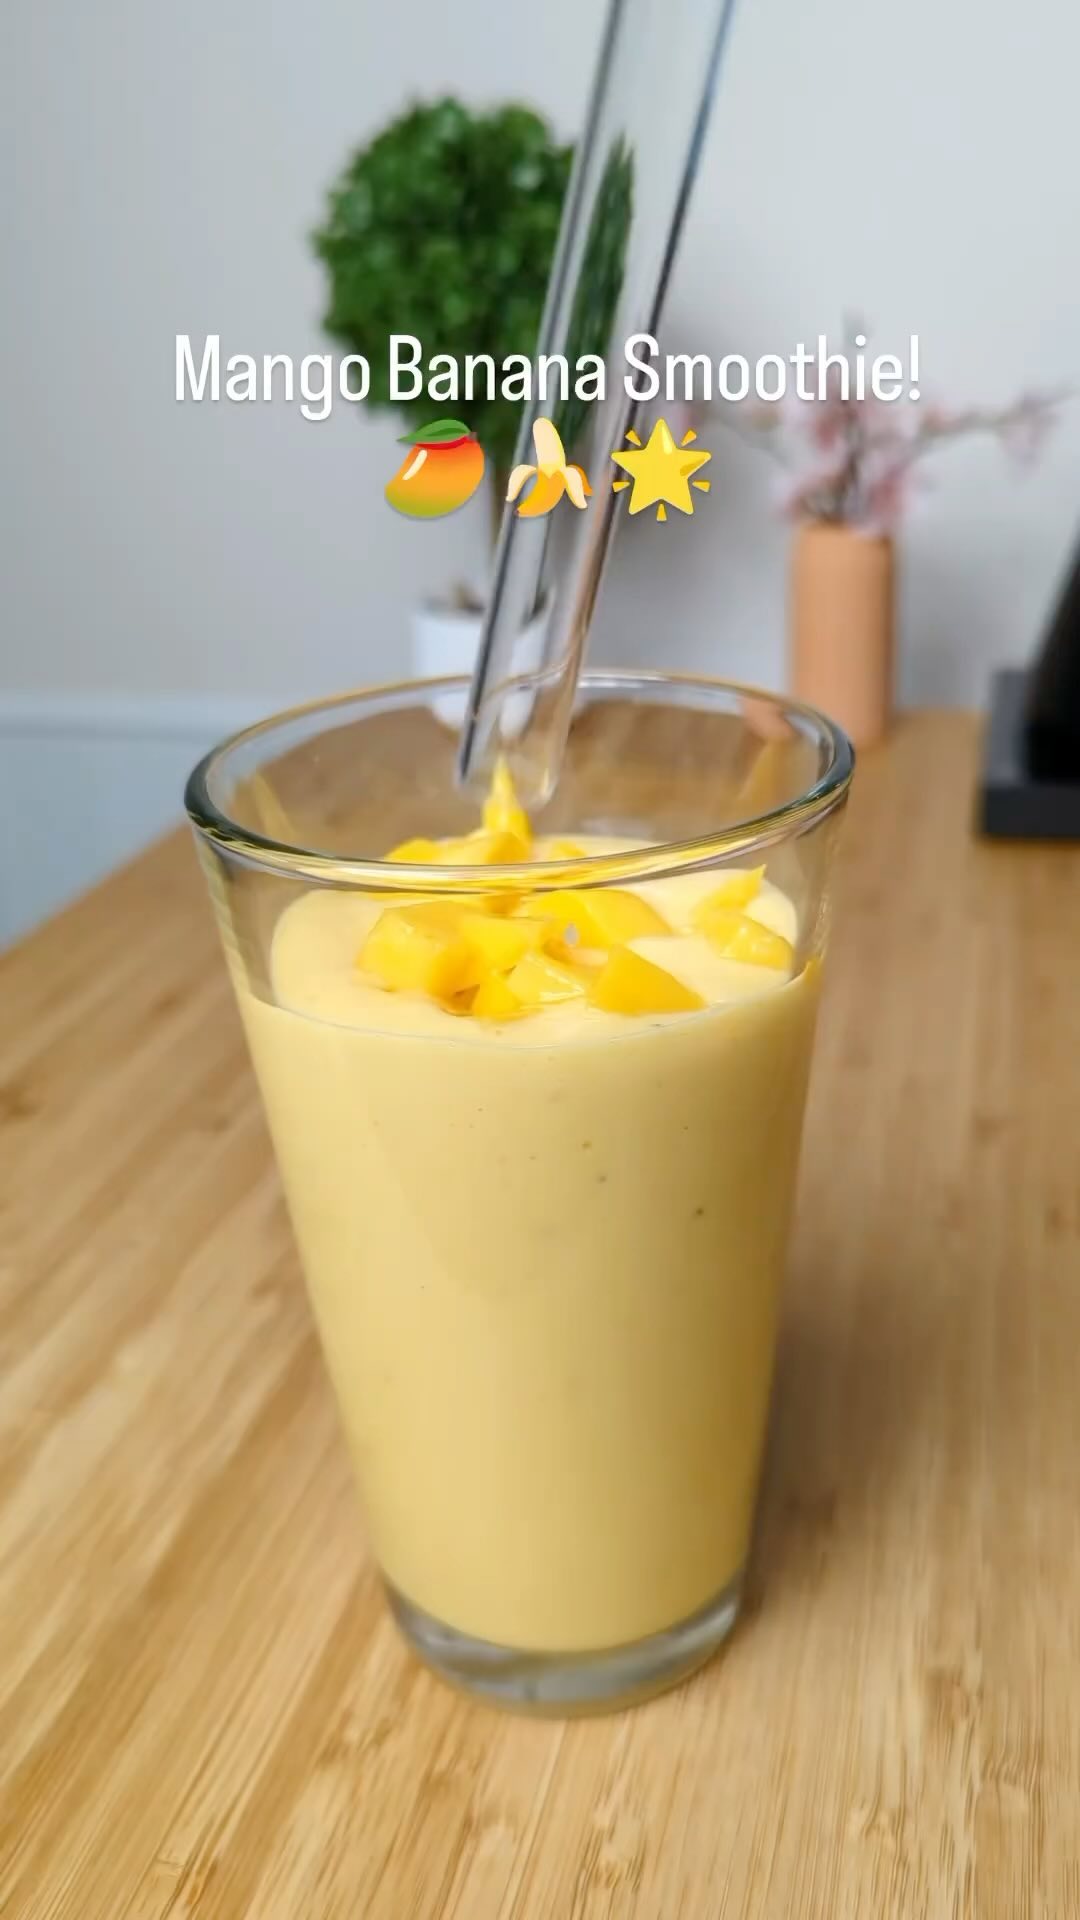 Treat yourself to a tropical delight with this refreshing Mango Banana